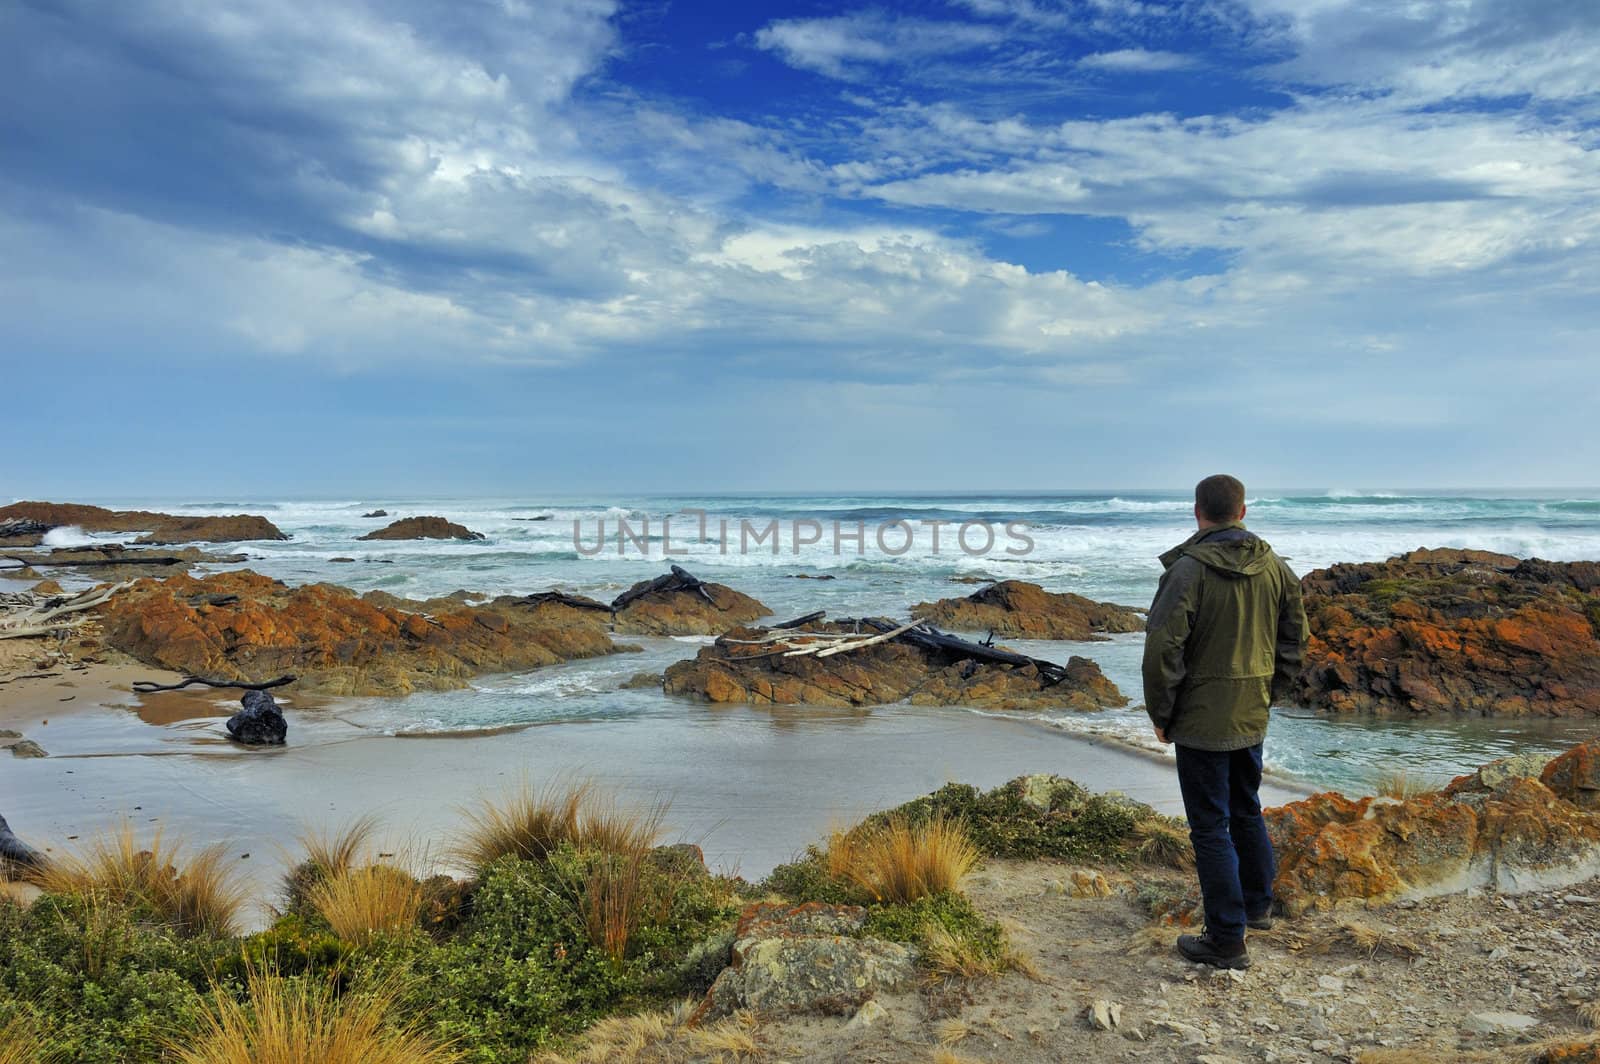 A solitary figure stands on the shoreline looking out to sea, on the west coast of Tasmania.